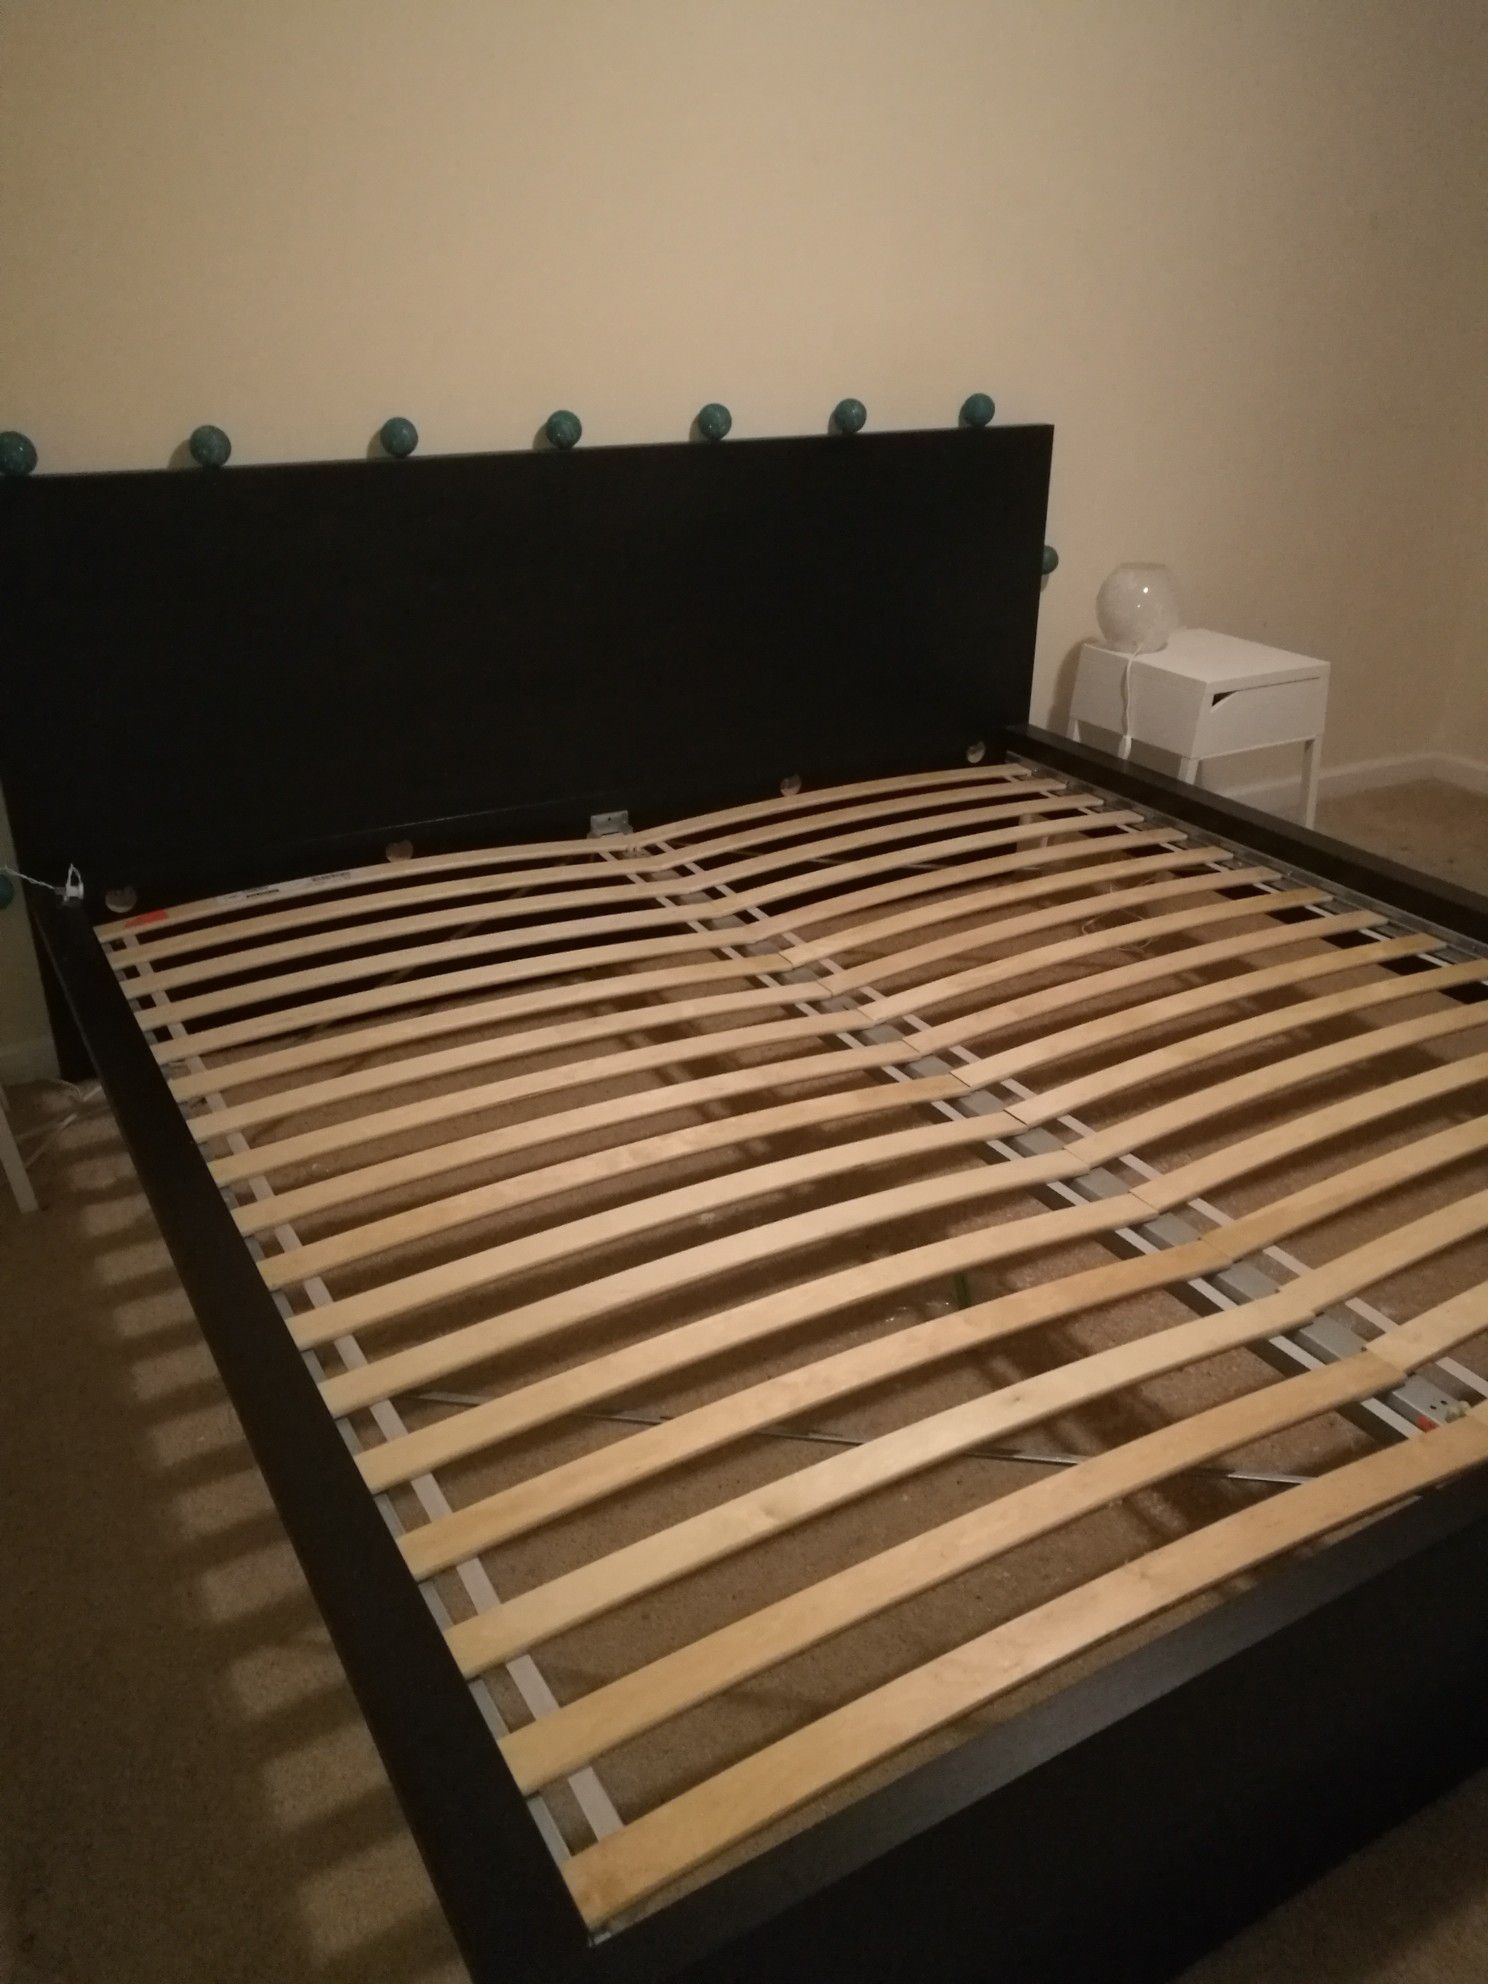 IKEA king size bed frame